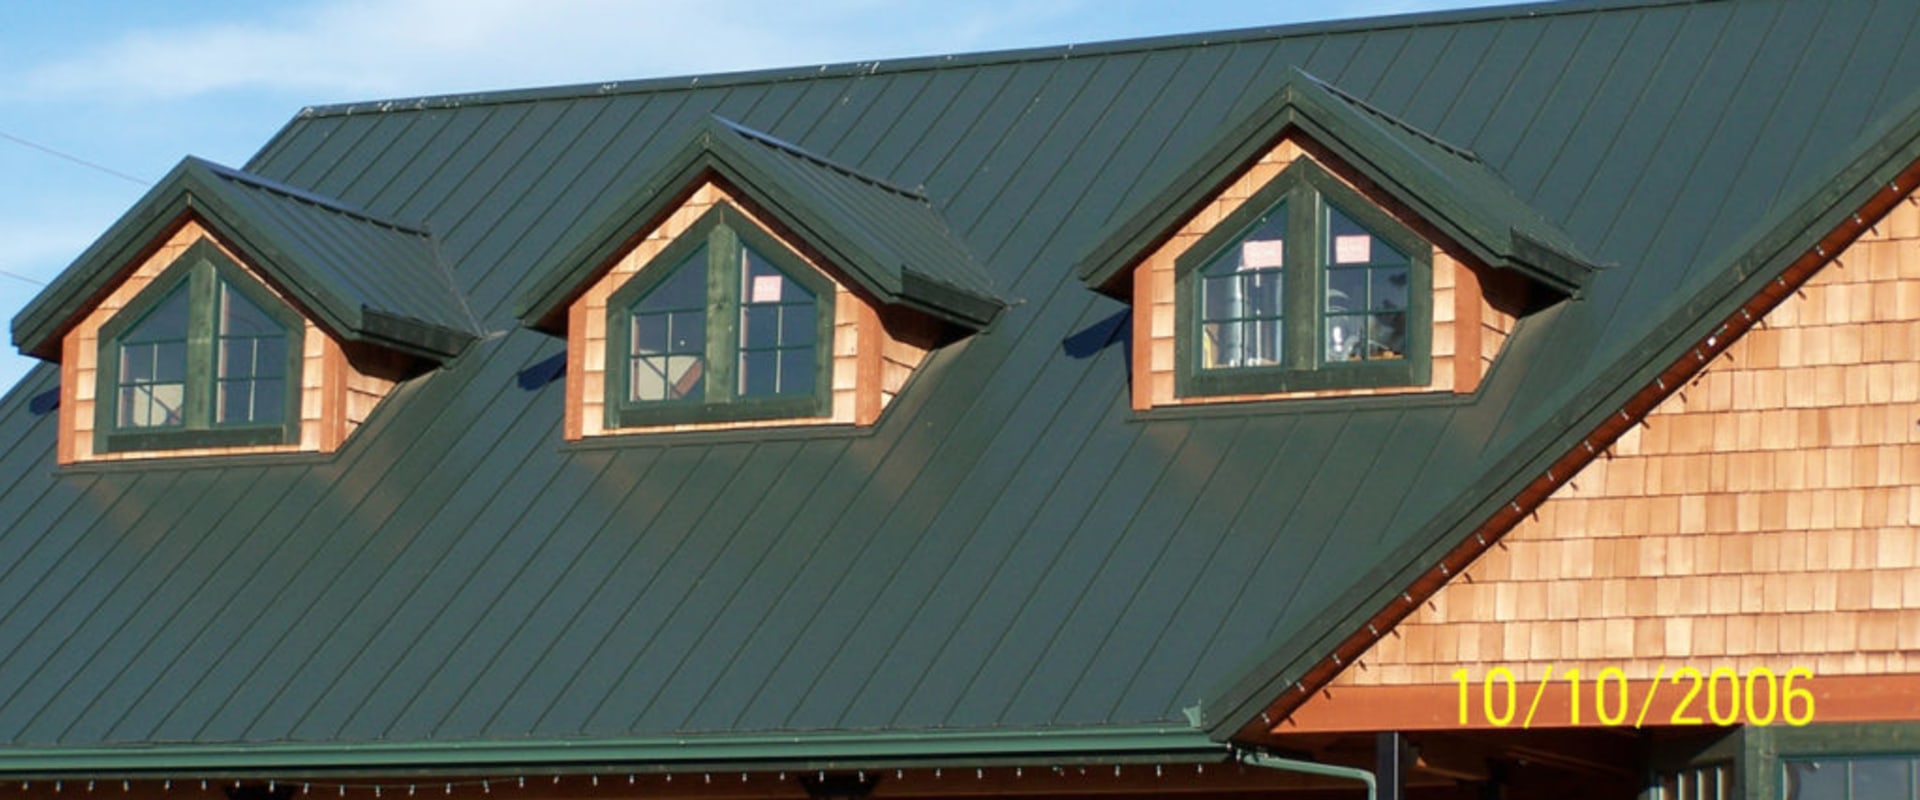 Durability: The Key Factor in Choosing the Right Roofing and Siding Materials